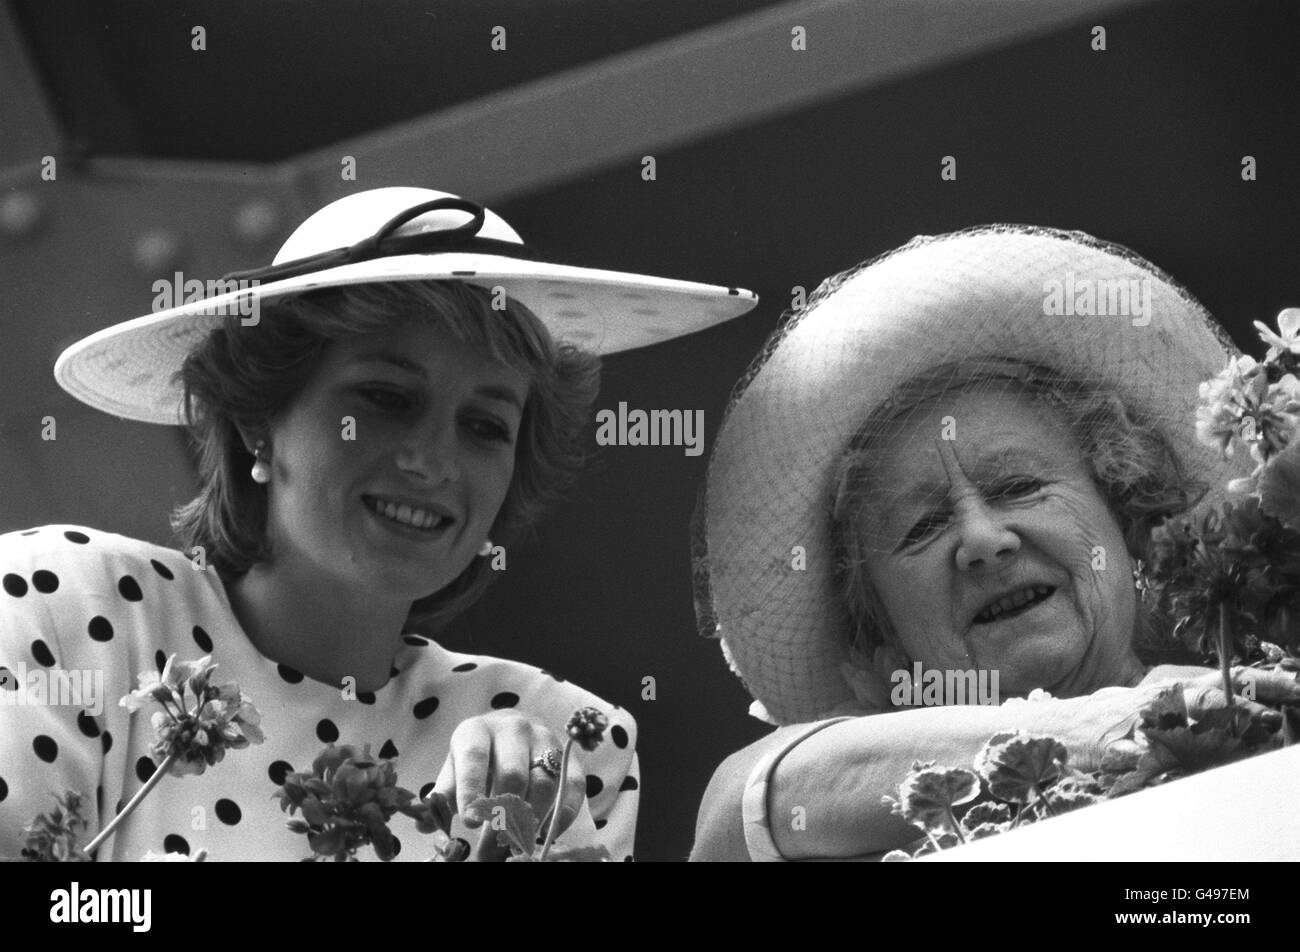 PA NEWS PHOTO JUNE 1986 THE QUEEN MOTHER WITH THE PRINCESS OF WALES AT ROYAL ASCOT RACES Stock Photo